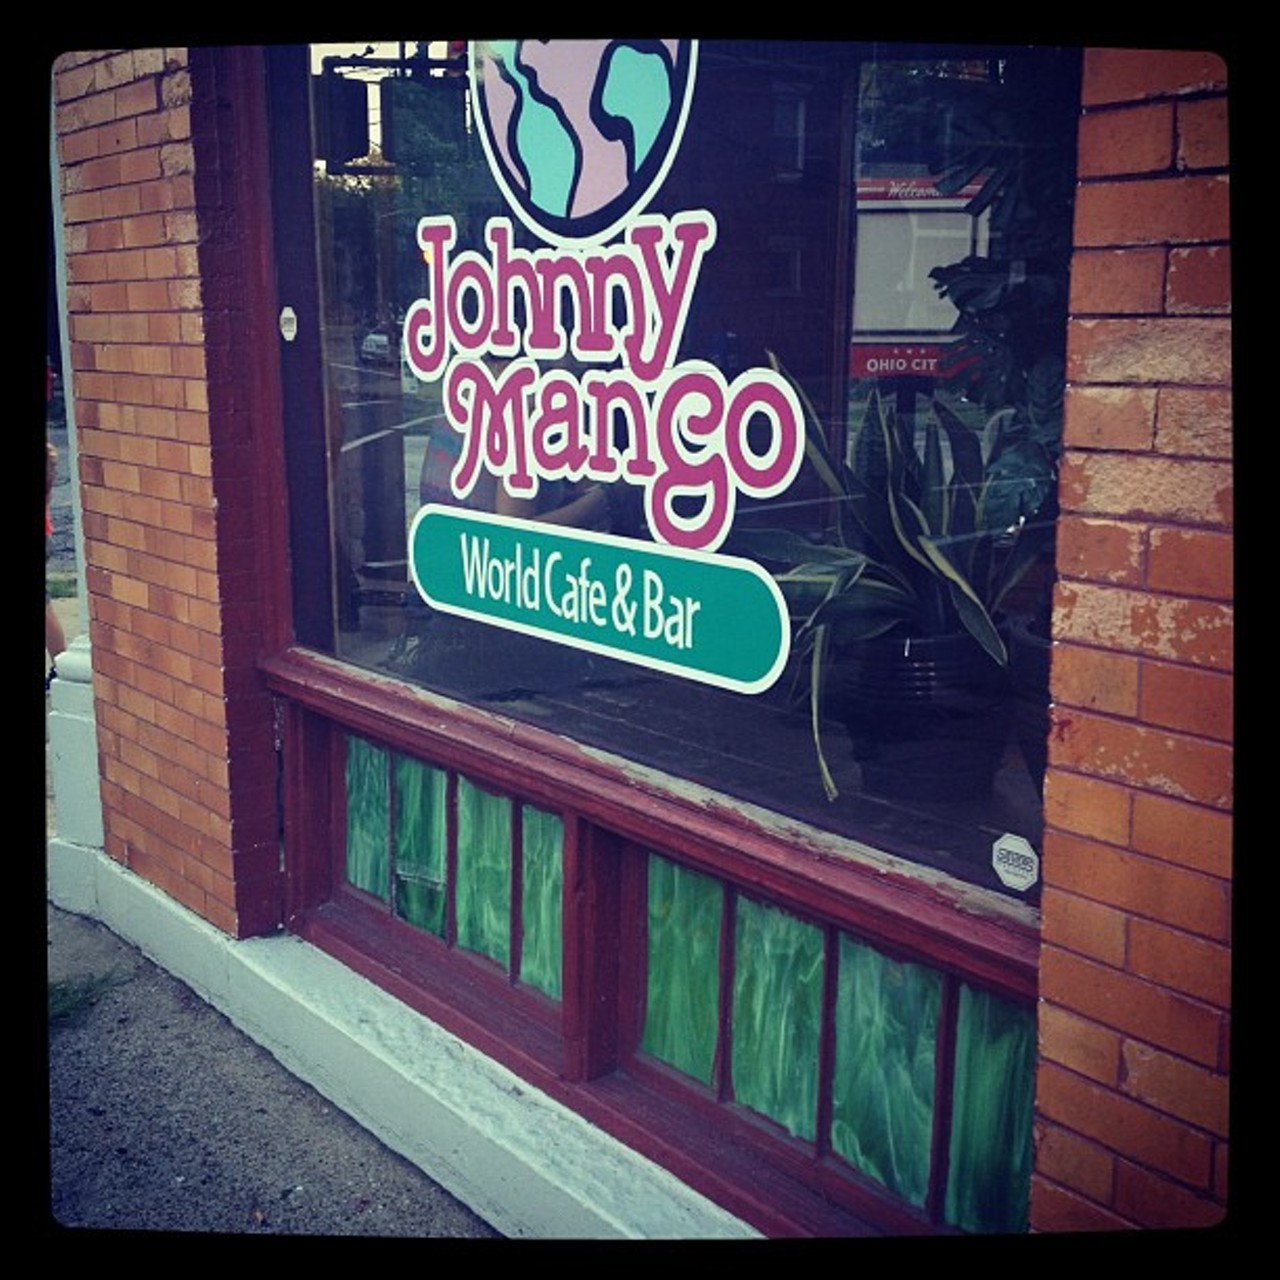 There are allegedly at least three malicious spirits that haunt Johnny Mango’s. Each spirit died violently nearby. Management even brought in a psychic to try and banish the spirits, but it didn’t work.